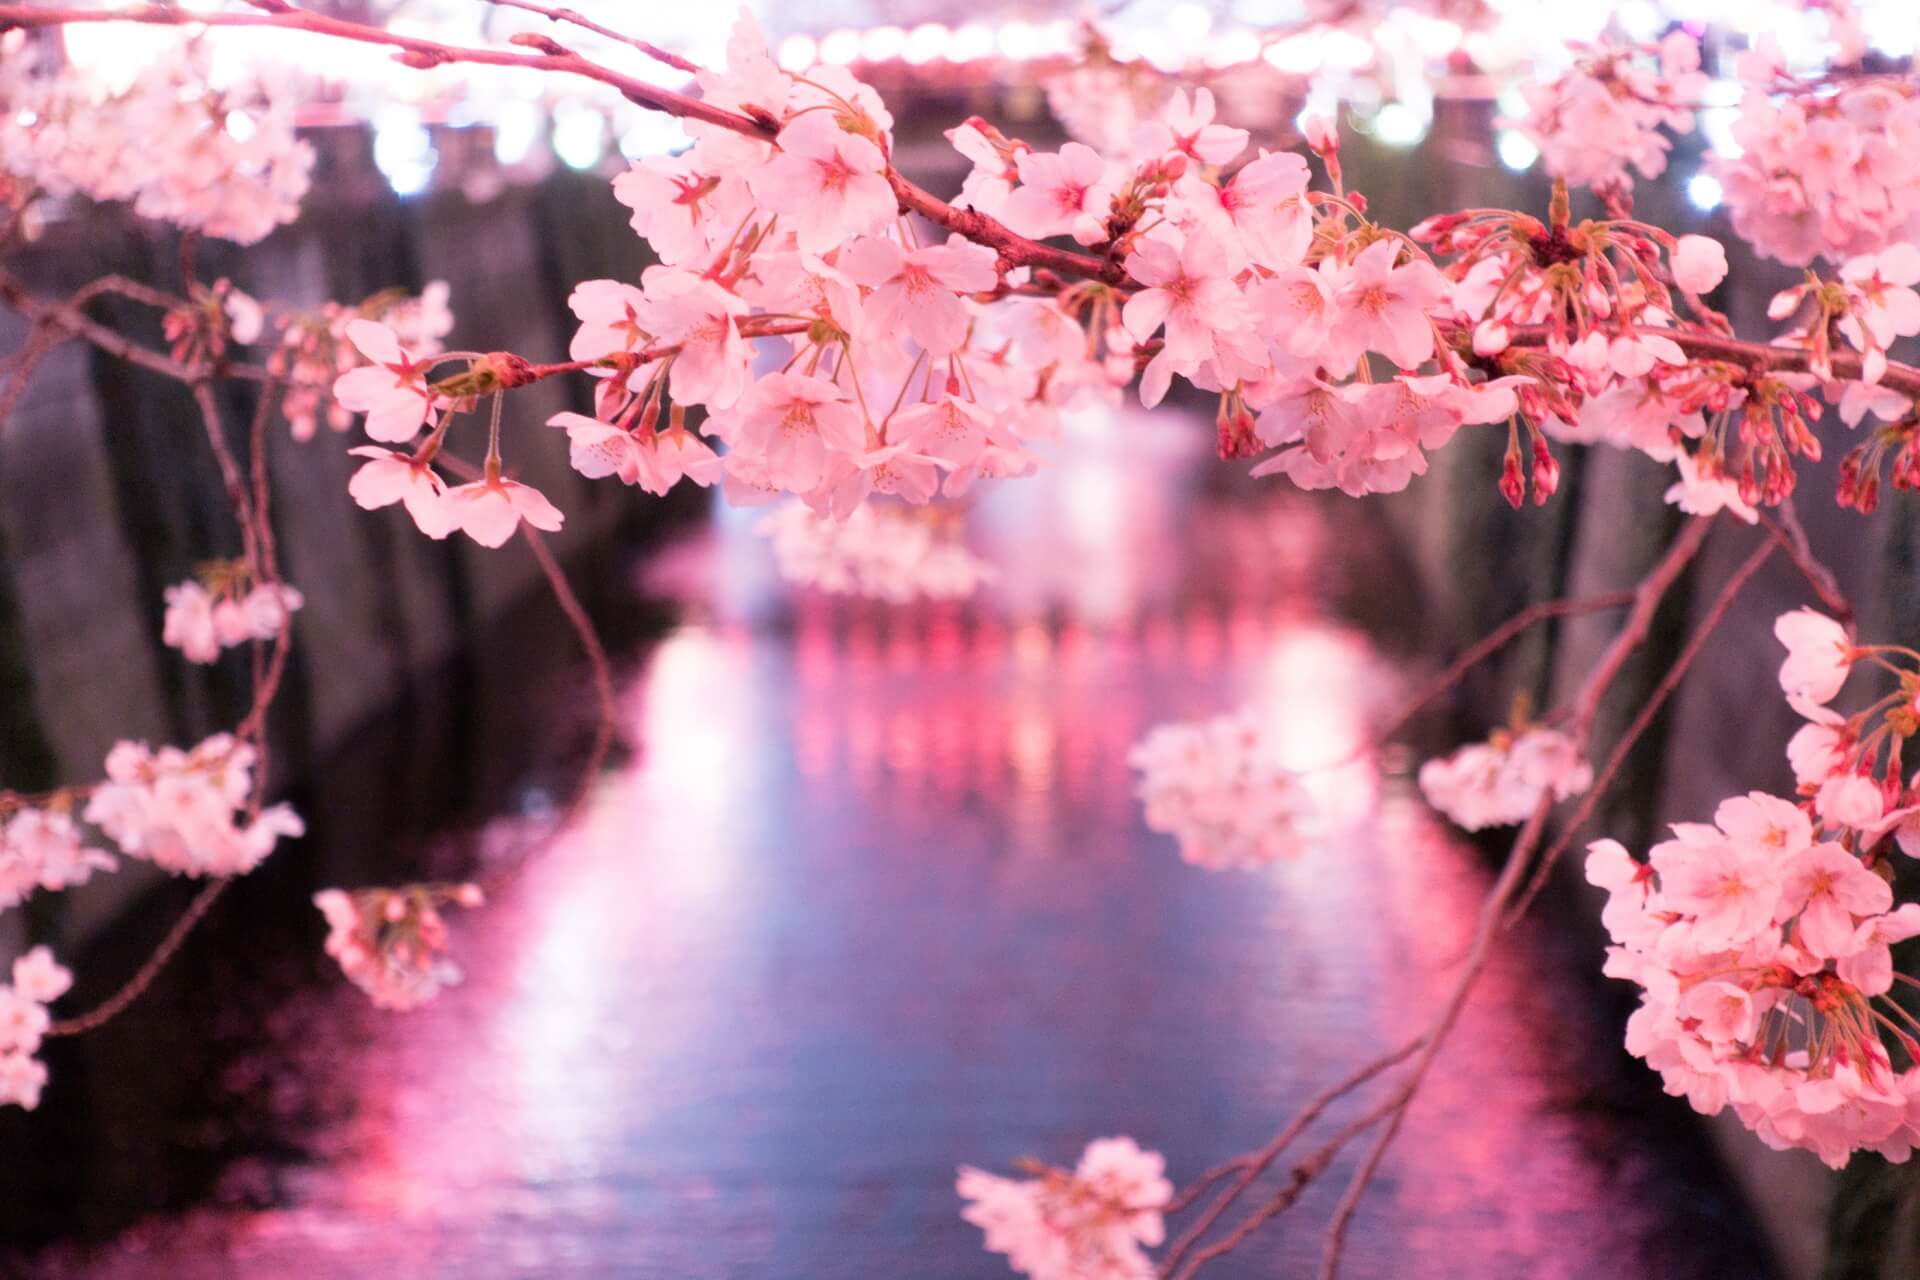 25 Best Places to See Cherry Blossoms In & Around Tokyo SNOW MONKEY